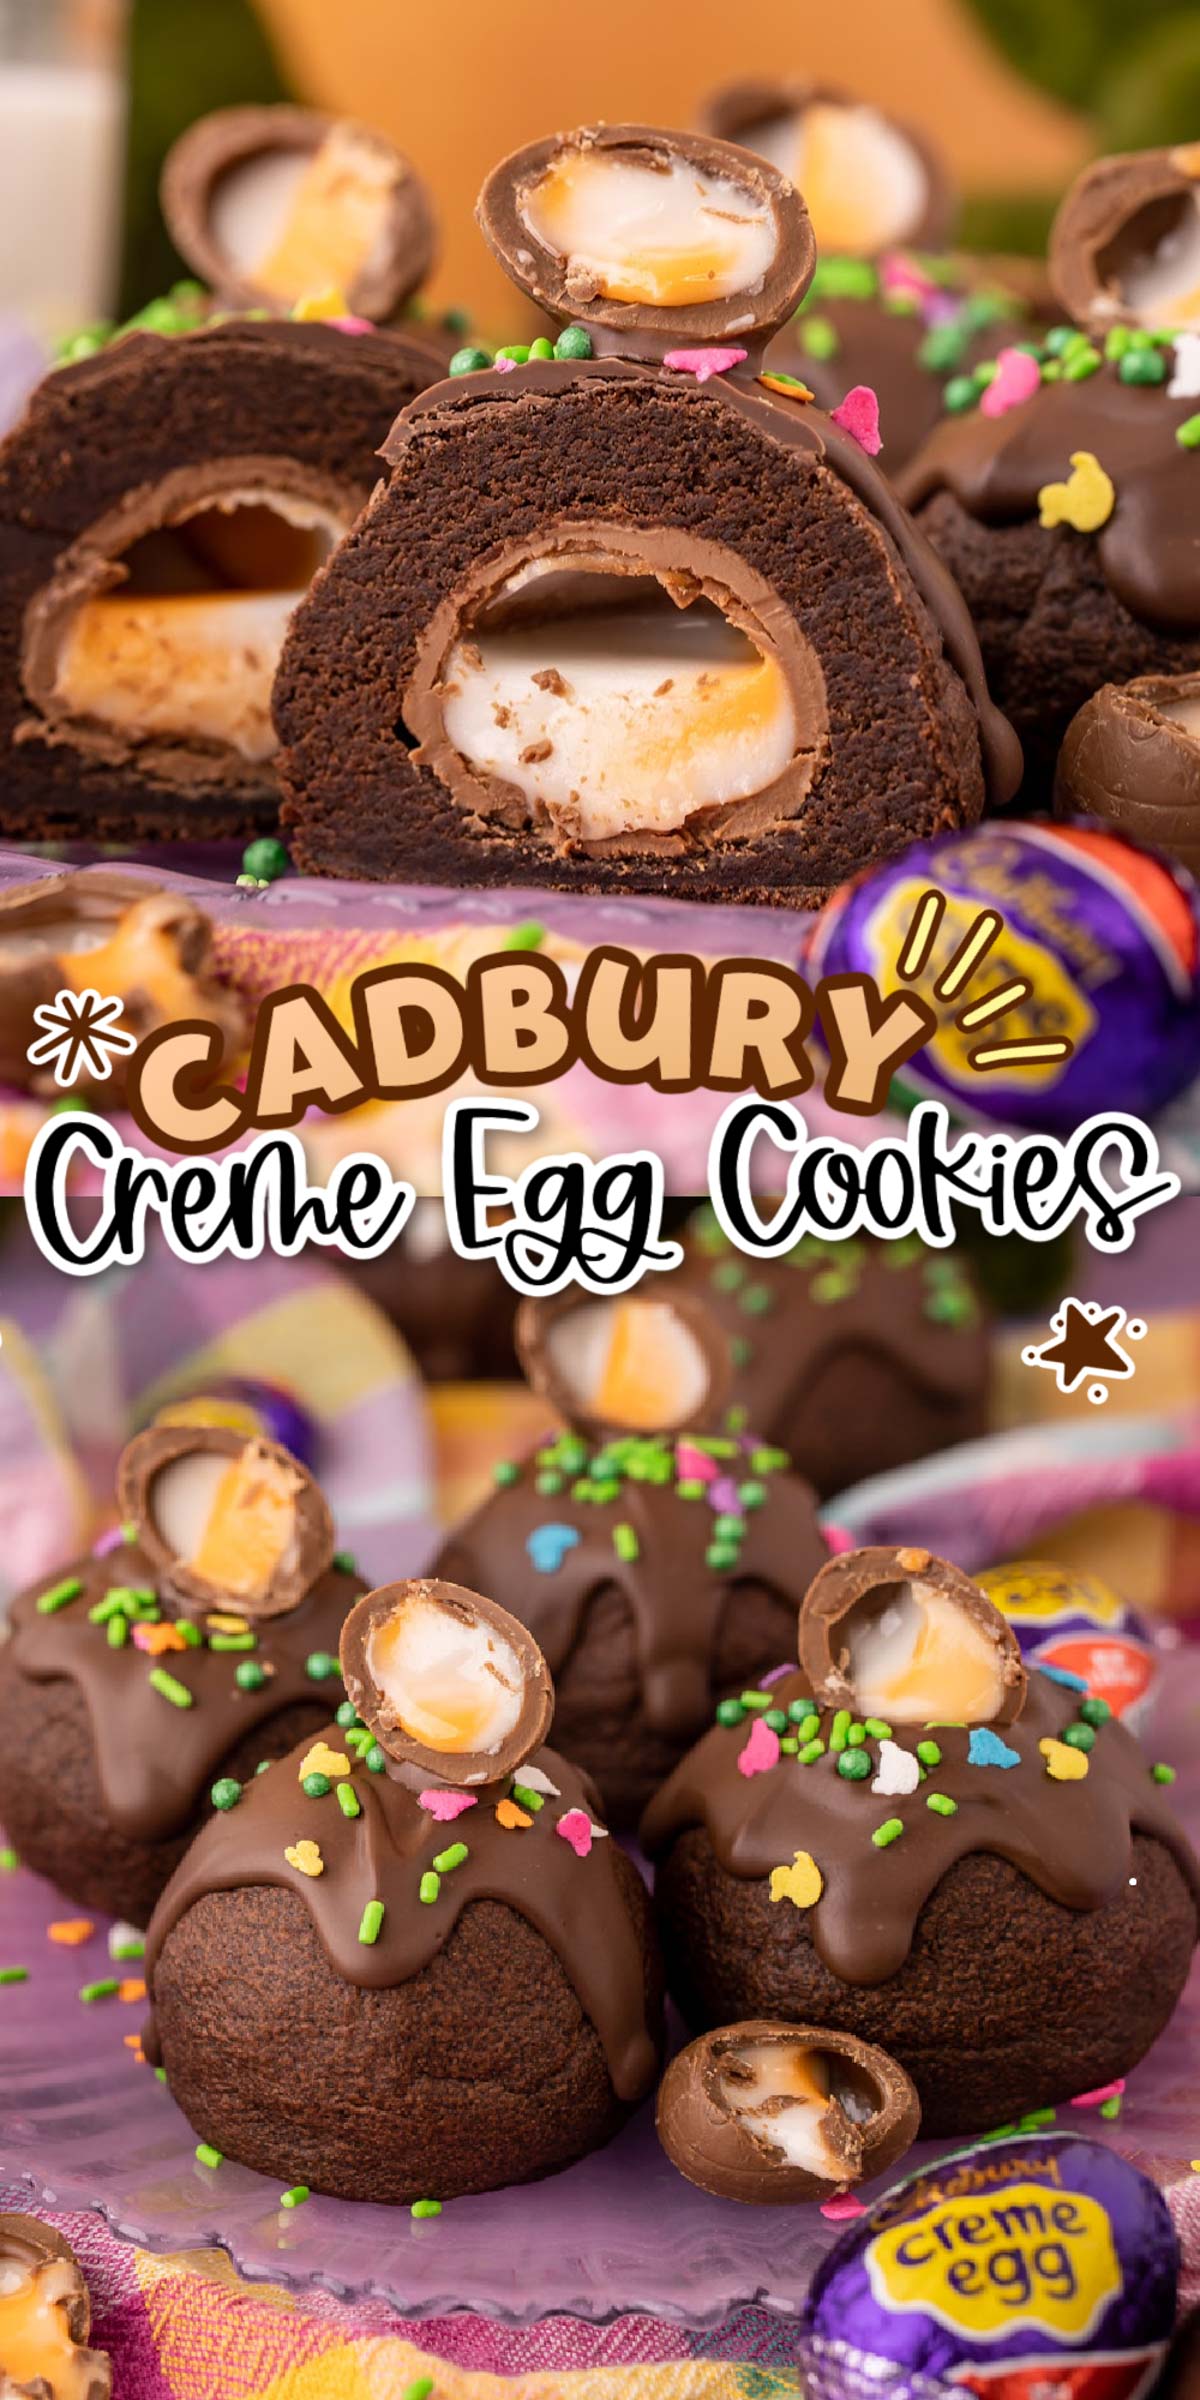 Cadbury Creme Egg Cookies are an impressive Easter treat with a Cadbury creme egg center, colorful sprinkles, and mini creme egg on top! A gourmet cookie recipe with step-by-step instructions that take just 15 minutes to prep! via @sugarandsoulco